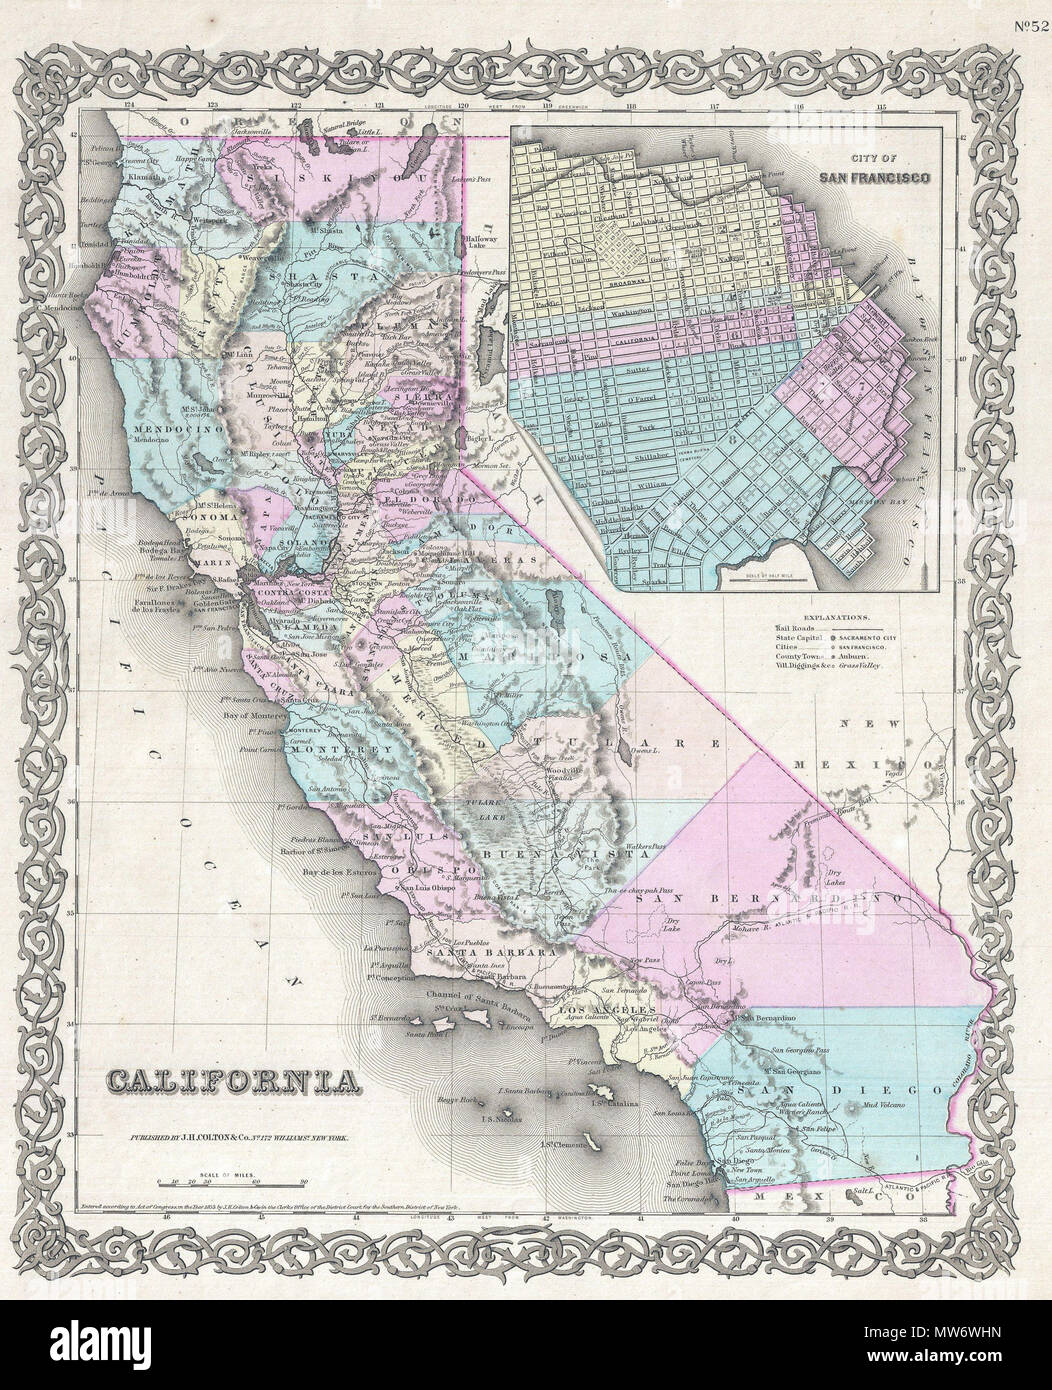 . California. City of San Francisco.  English: Issued roughly six years after the 1849 California Gold Rush, this is a beautiful 1855 first edition first state example of Colton's map of California. Colton's California with its San Francisco inset is one of the rarest and most desirable of all Colton atlas maps as it beautifully illustrates the rapid development throughout the state that followed in the wake of the Sutter's Mill discovery. Like most of Colton's state maps, this map was derived from an earlier wall map of North America produced by Colton and D. Griffing Johnson. Covers the enti Stock Photo